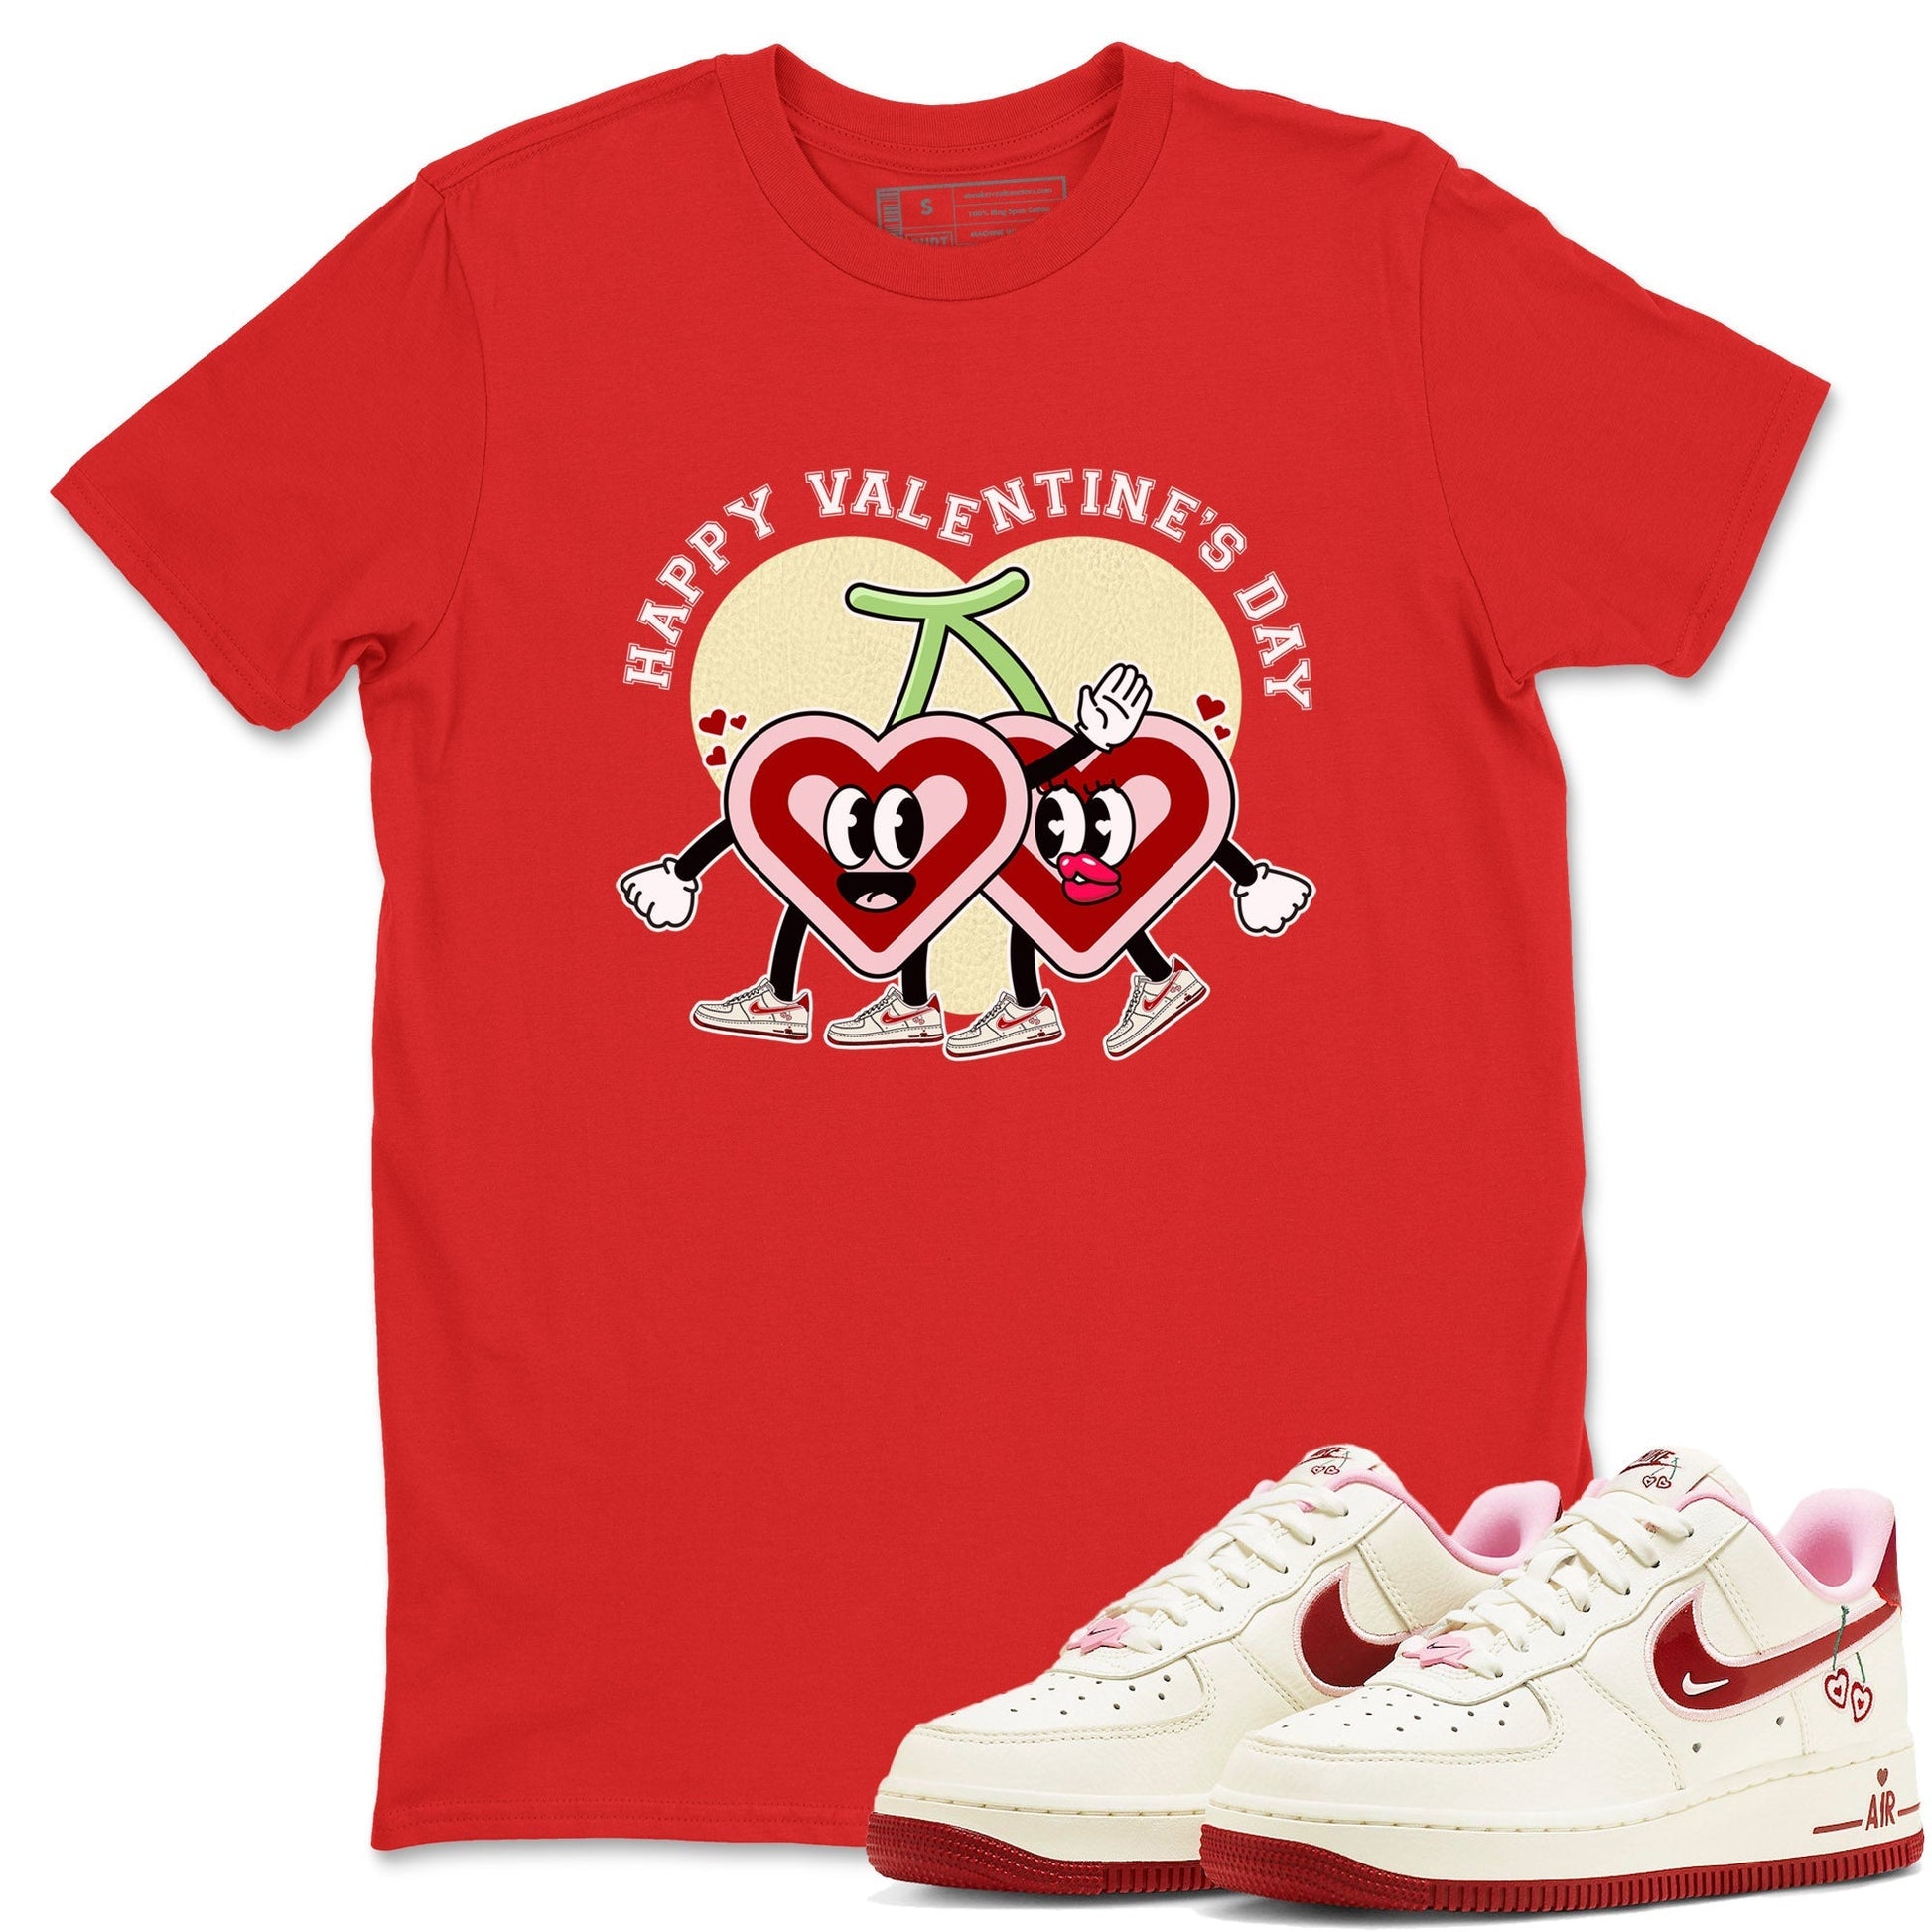 Air Force 1 Valentines Day Sneaker Match Tees Happy Valentines Day Sneaker Tees Air Force 1 Valentines Day Sneaker Release Tees Unisex Shirts